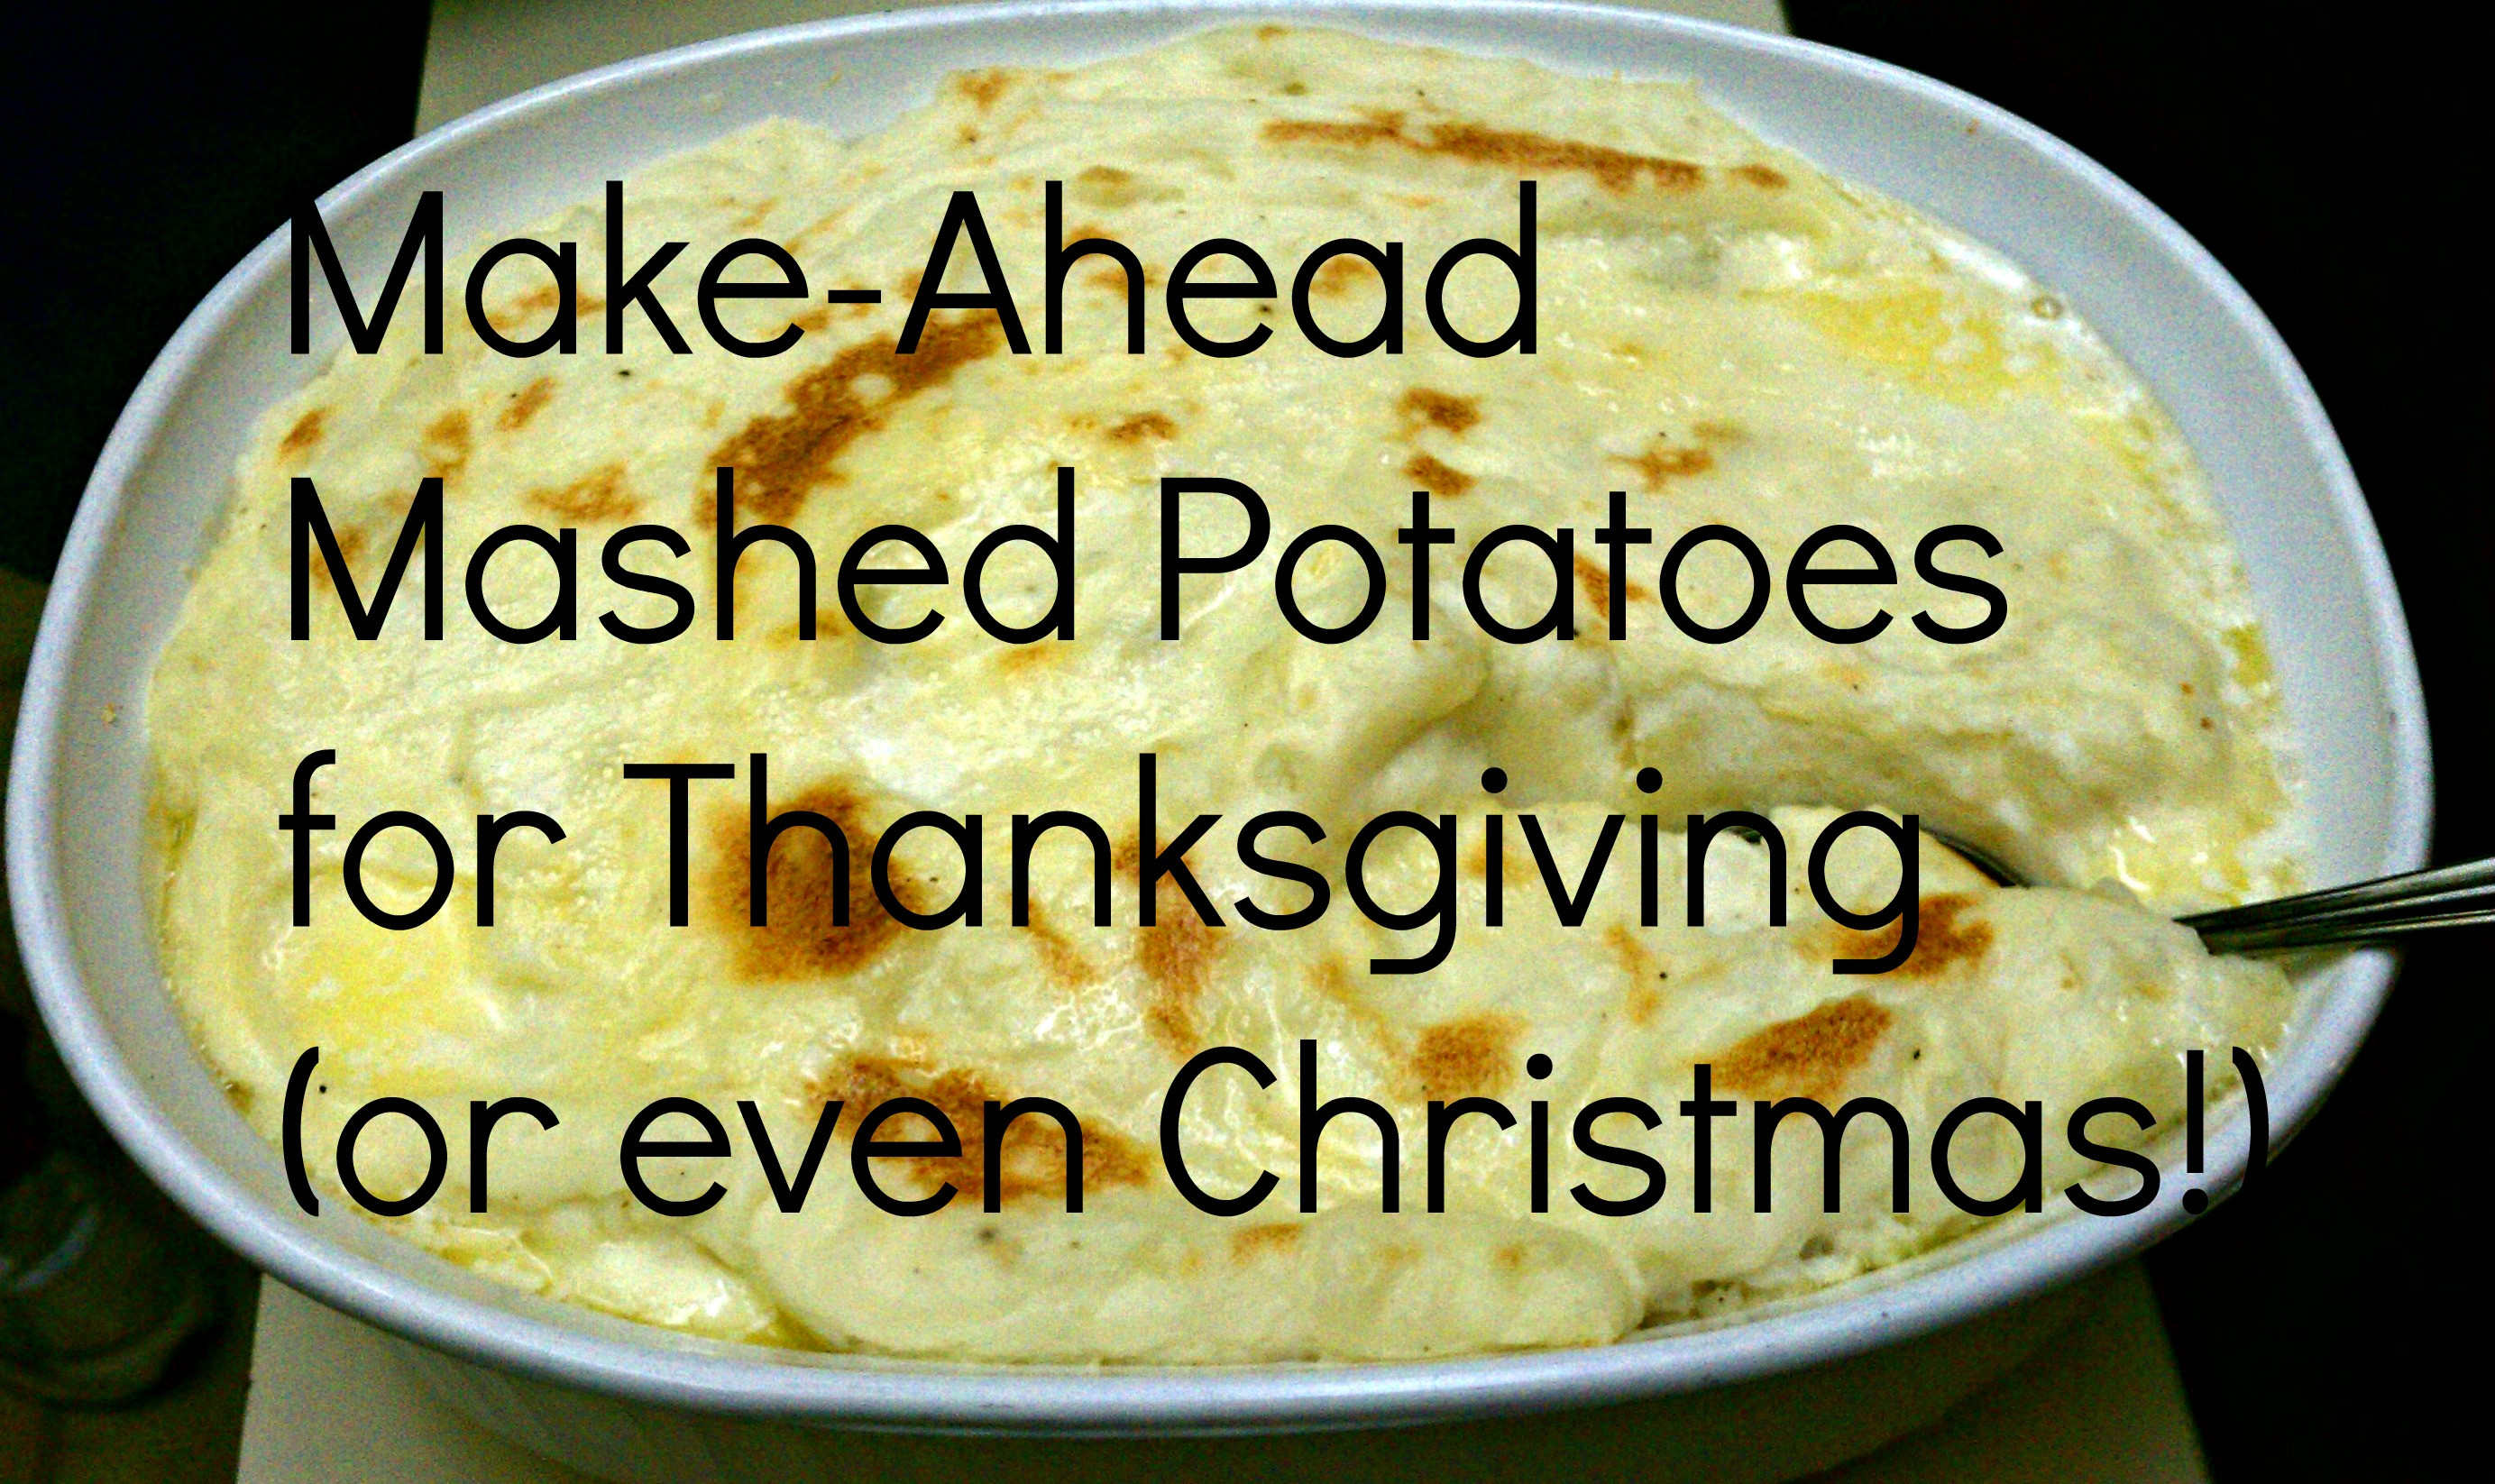 Make Ahead Mashed Potatoes Thanksgiving
 How To Freeze Mashed Potatoes Now For Thanksgiving